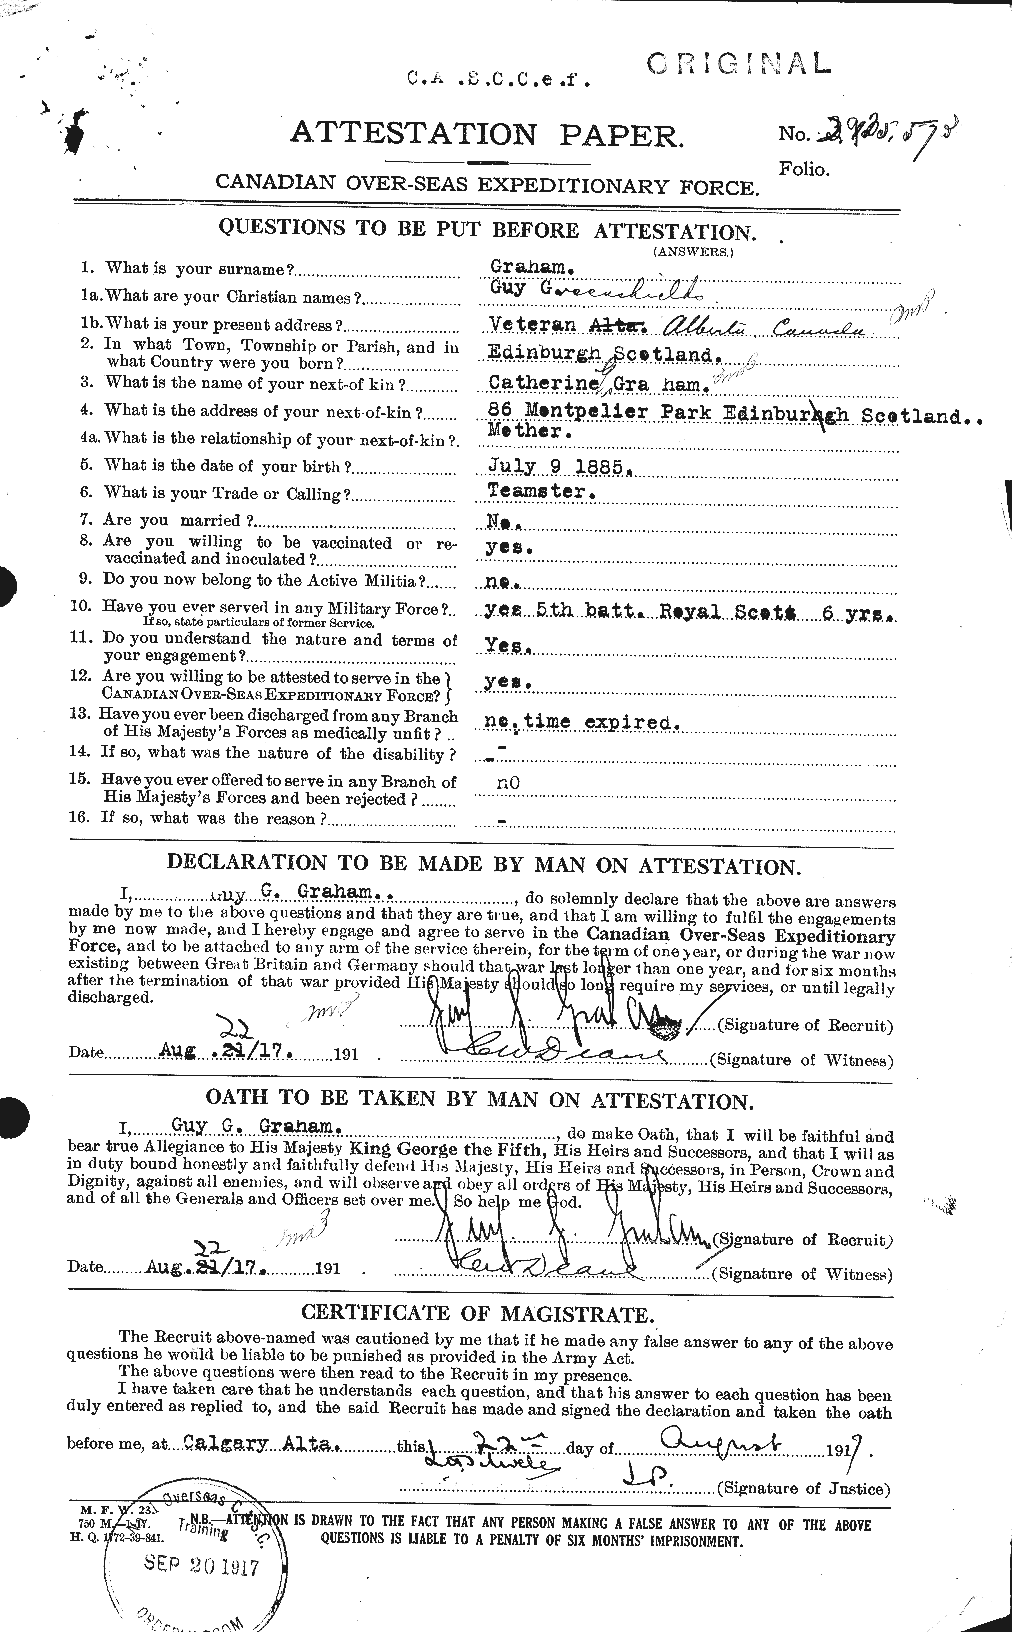 Personnel Records of the First World War - CEF 357689a